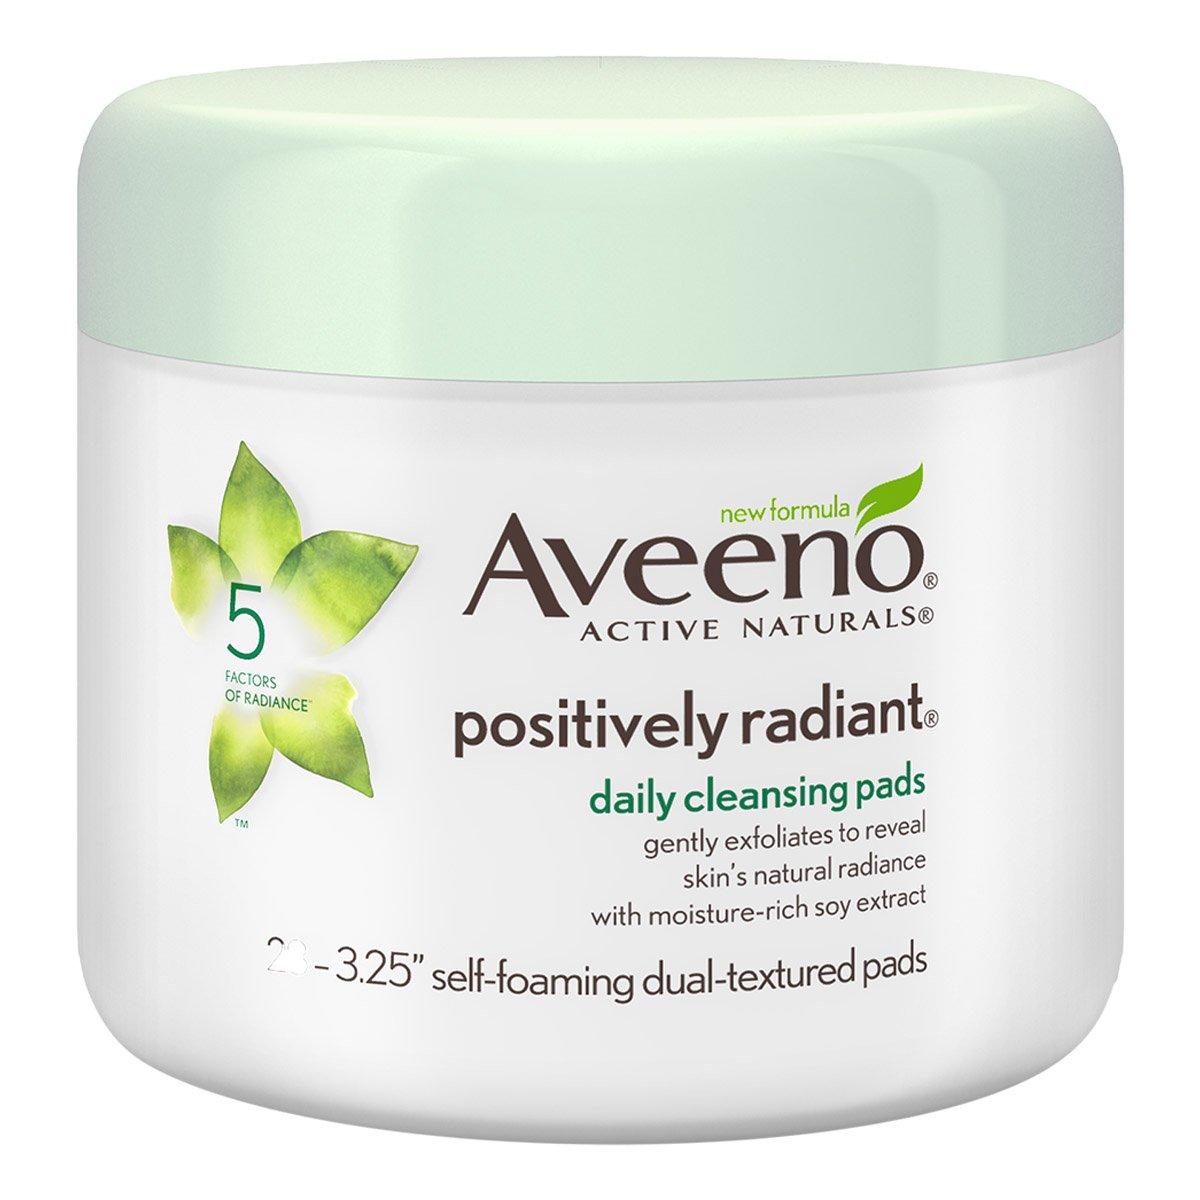 Positively Radiant Daily Cleansing Pads